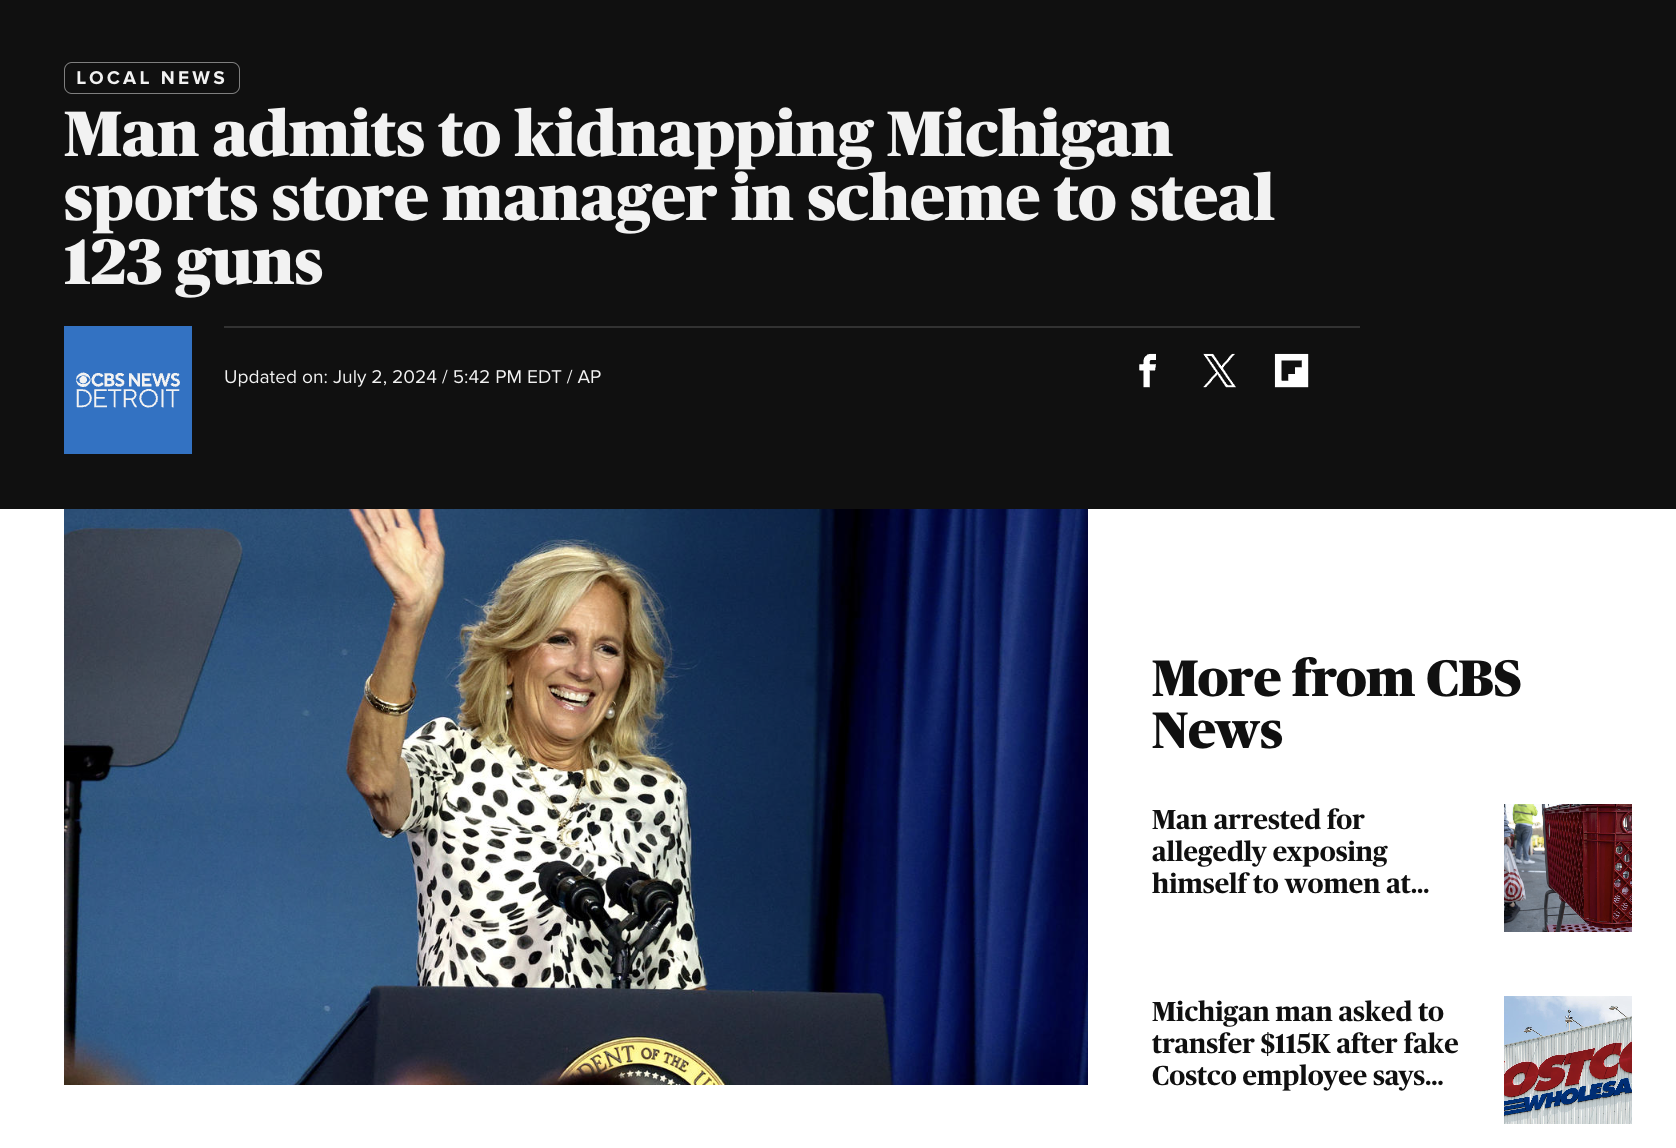 online advertising - Local News Man admits to kidnapping Michigan sports store manager in scheme to steal 123 guns Cbs News Updated on EdtAp Detroit f X More from Cbs News Man arrested for allegedly exposing himself to women at... Michigan man asked to tr